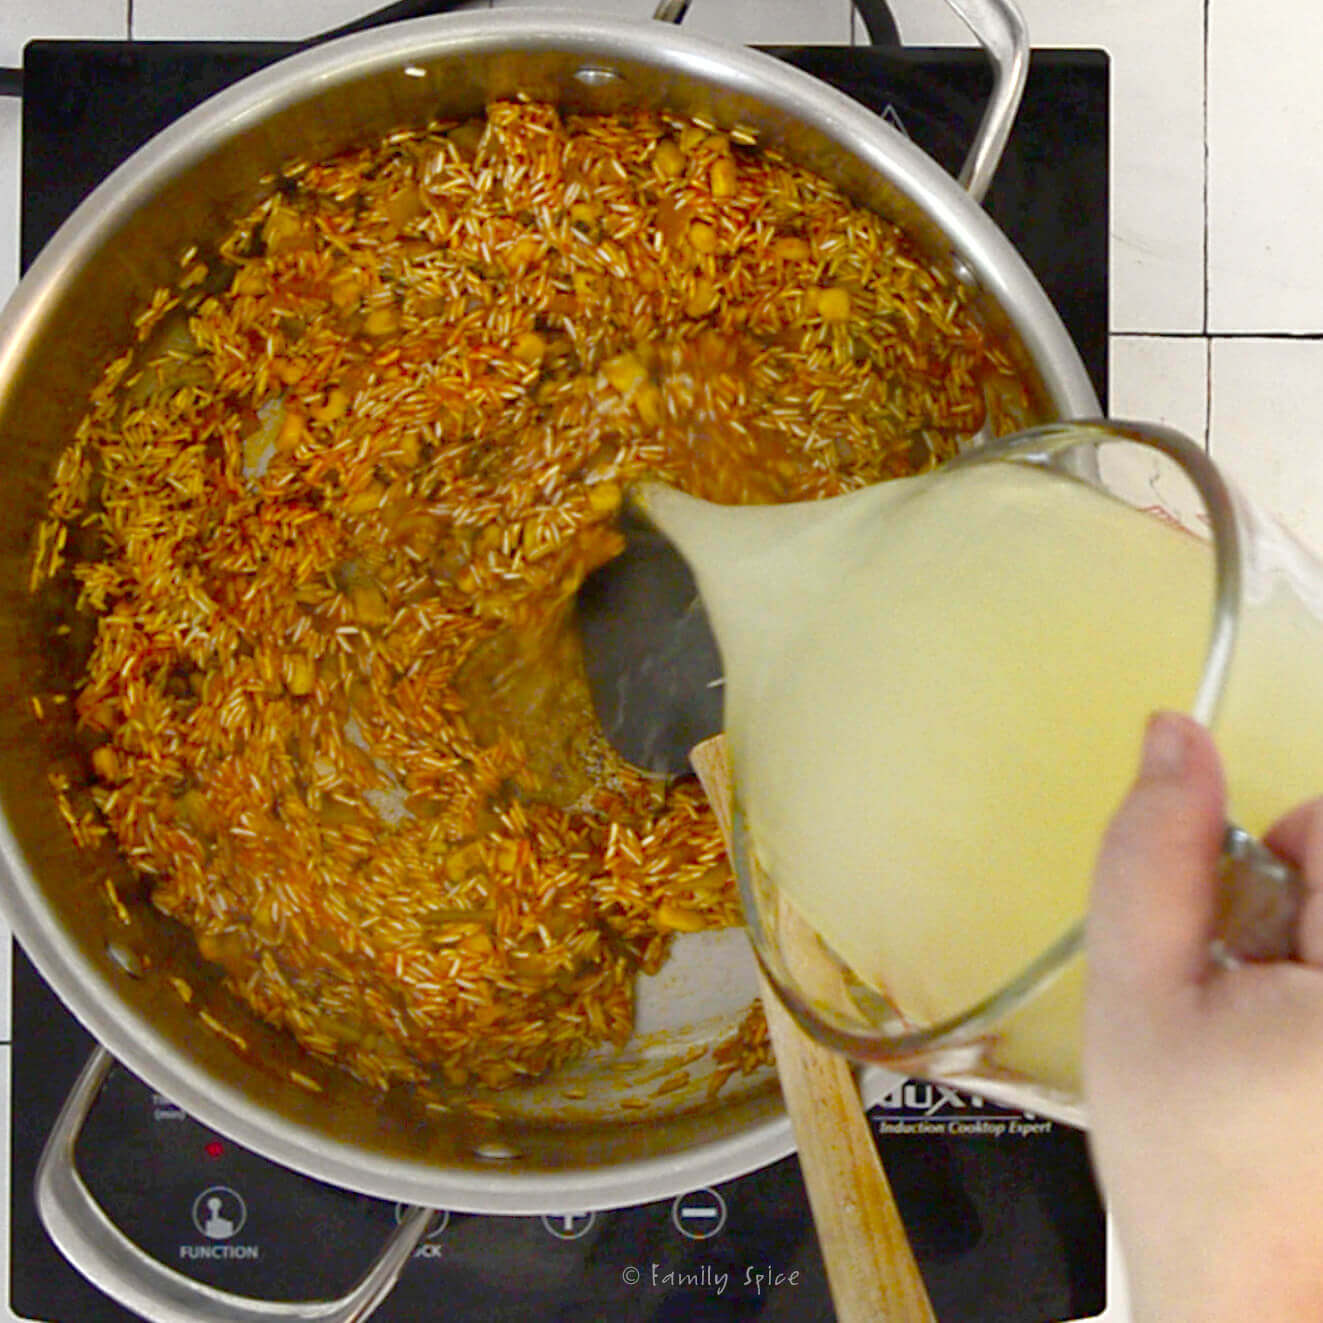 A hand pouring chicken broth into a stainless pot with remaining ingredients cooking to make spanish rice